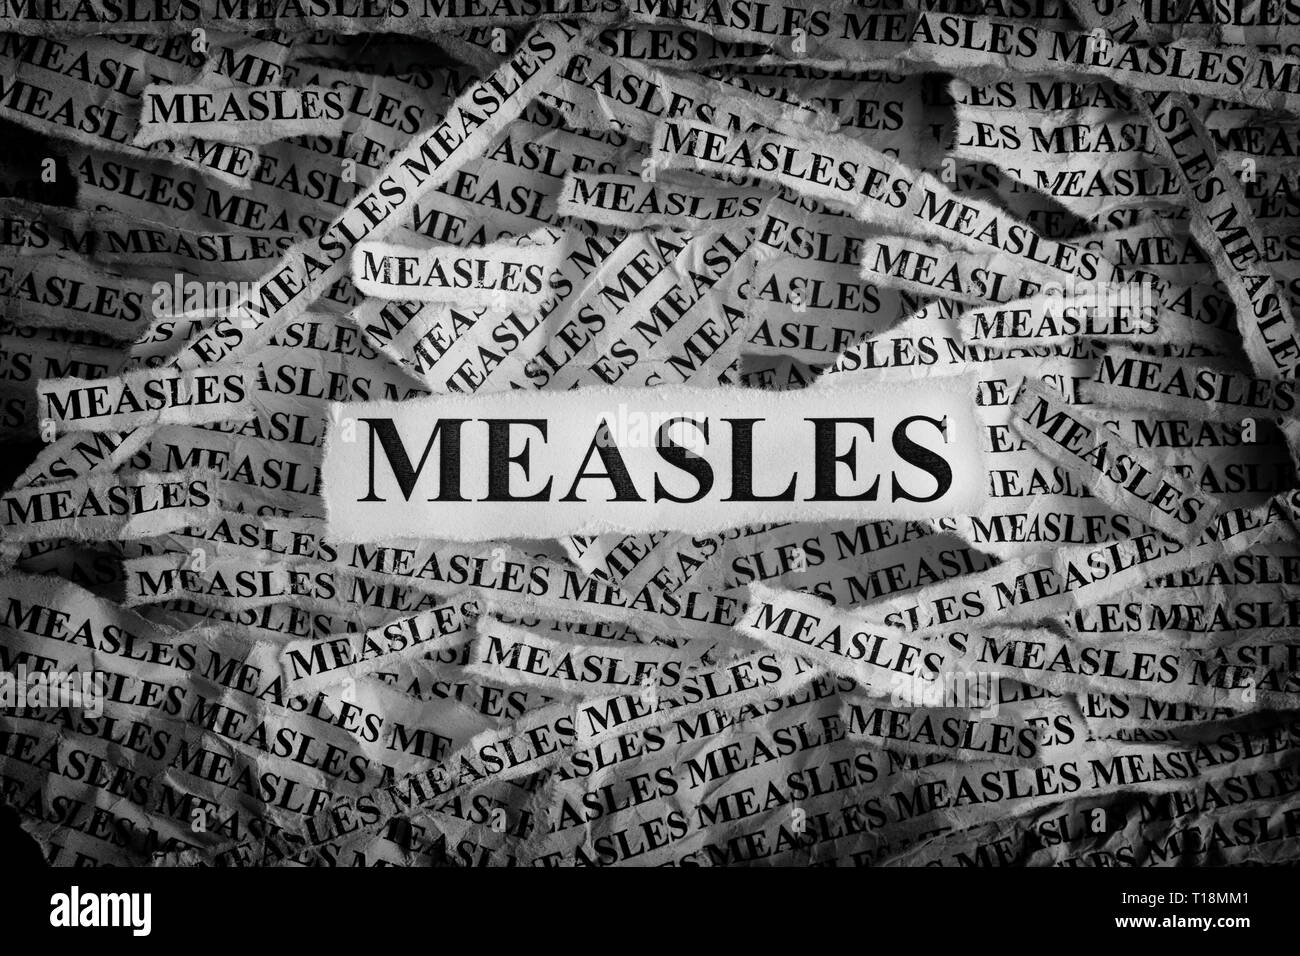 Measles. Torn pieces of paper with the words Measles. Concept image. Black and White. Close up. Stock Photo